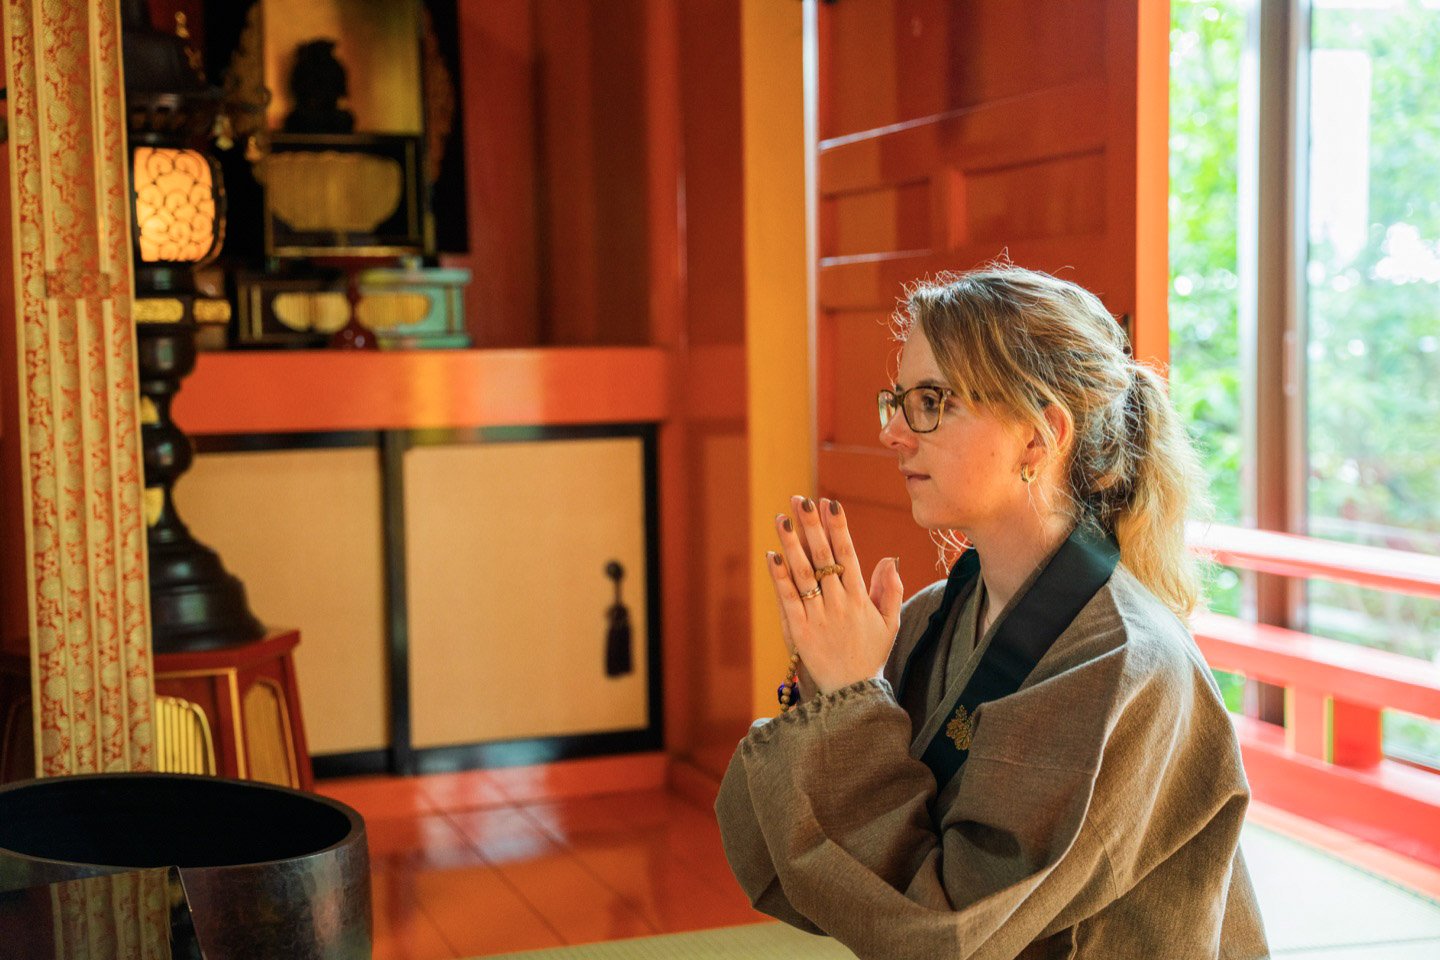 Temple life and Zazen experience